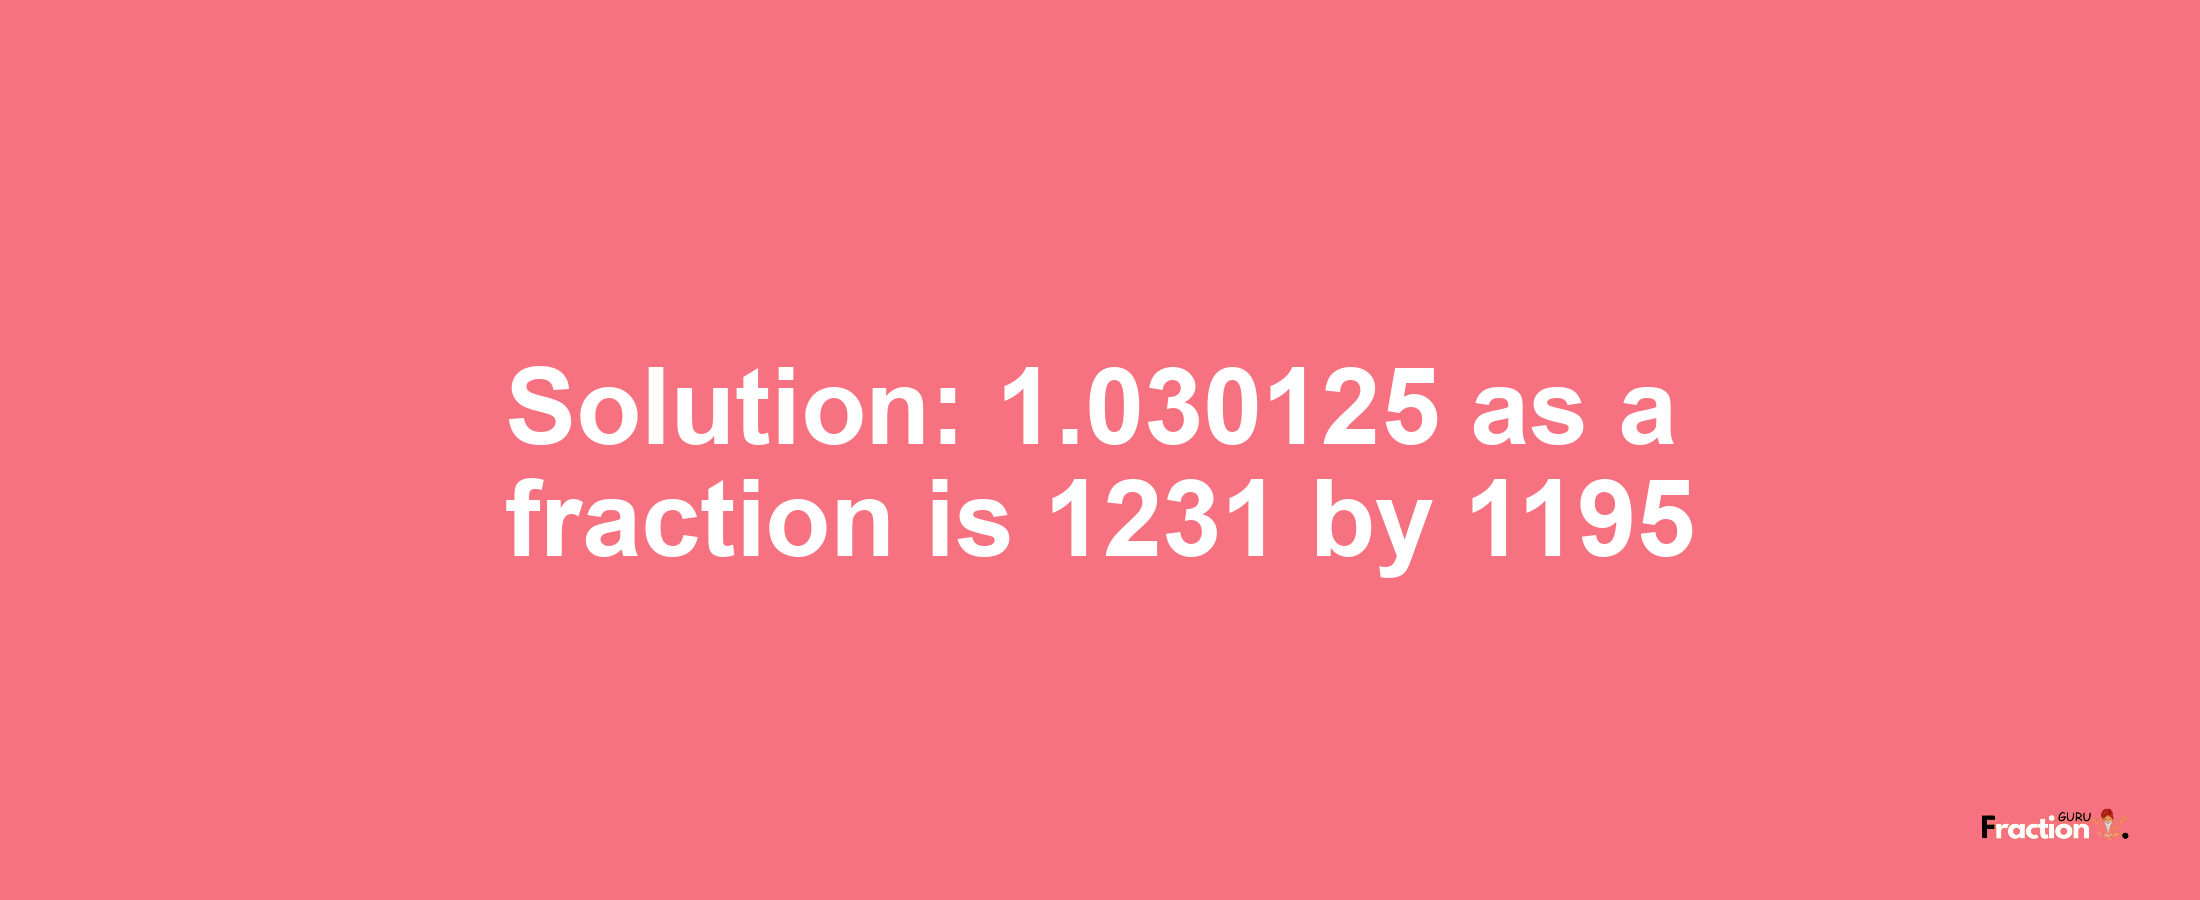 Solution:1.030125 as a fraction is 1231/1195